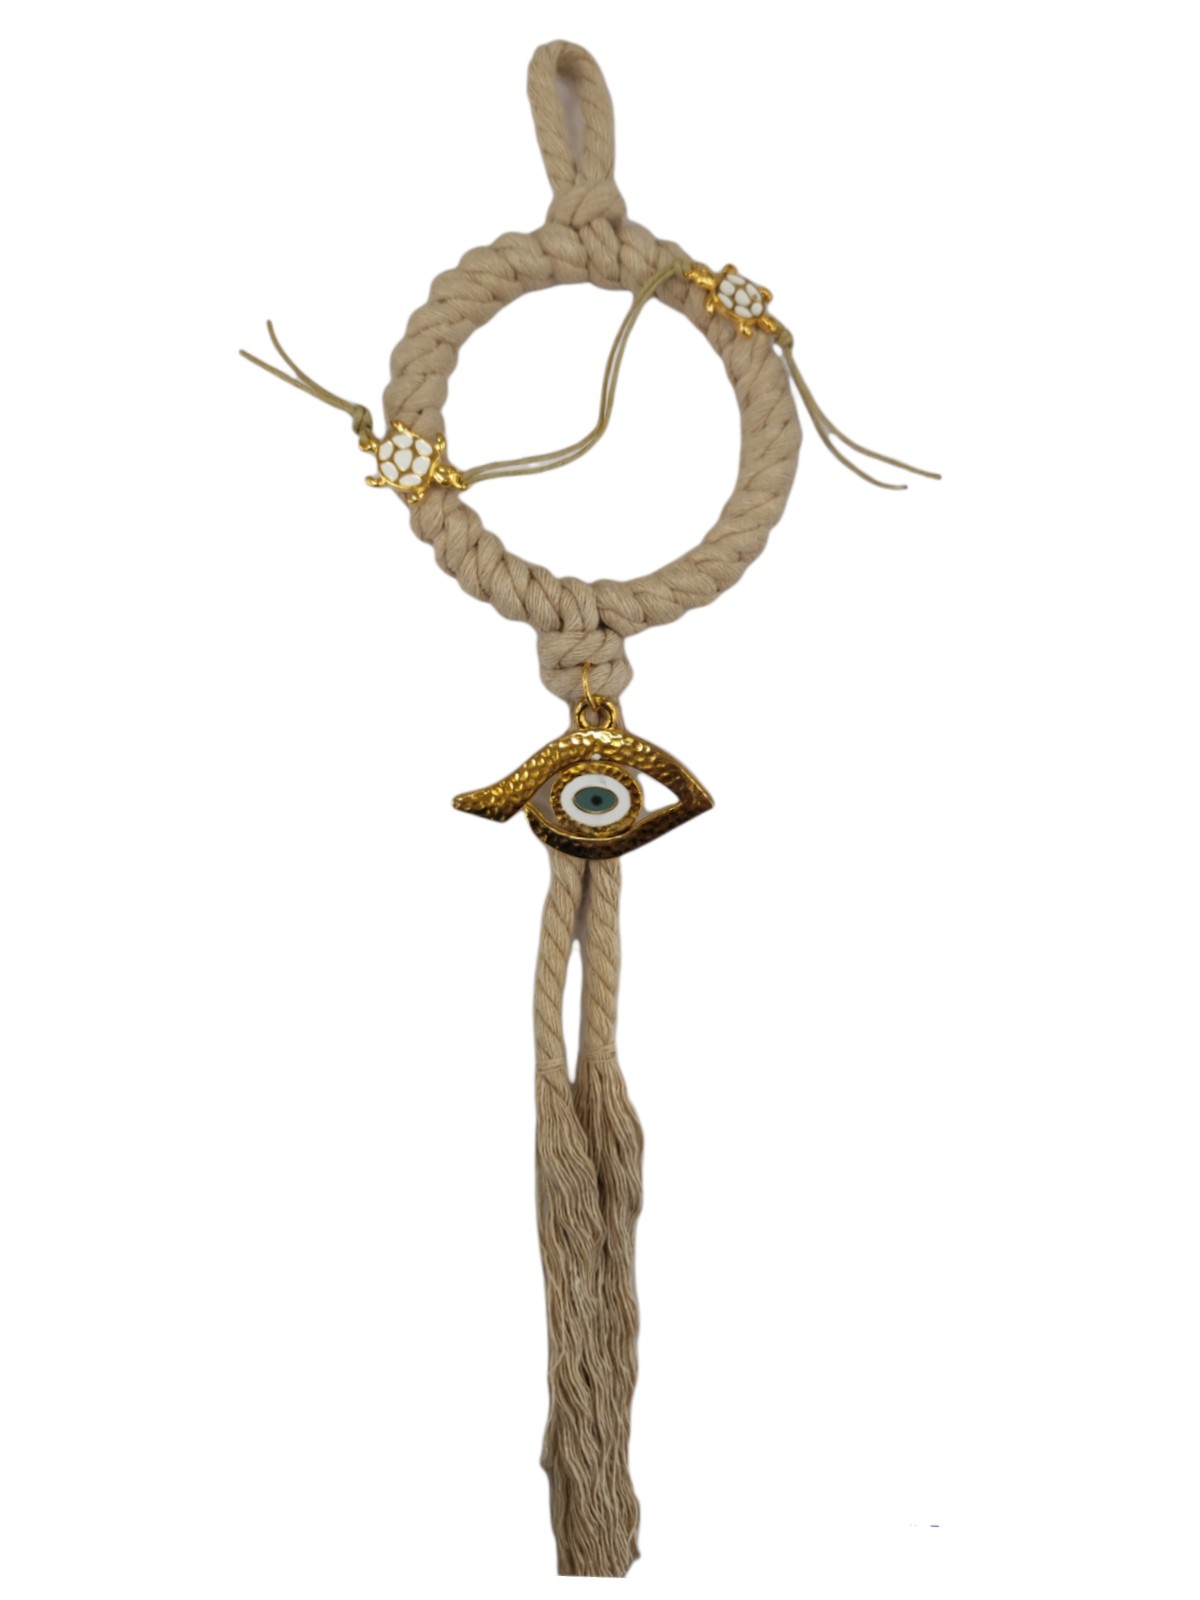 Hanging charm with cord and gold evil eye